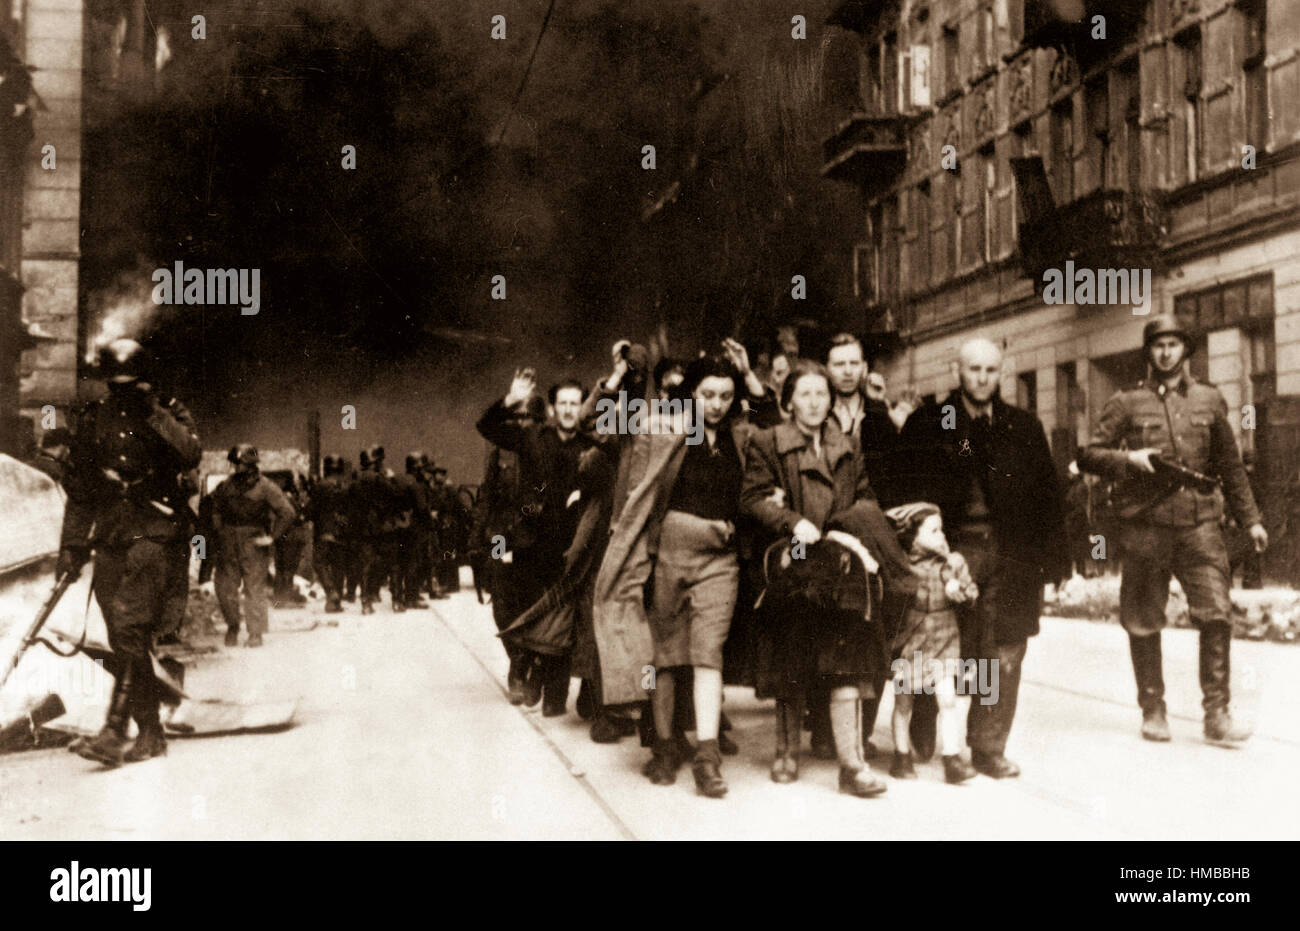 Jewish civilians.  Copy of German photograph taken during the destruction of the Warsaw Ghetto, Poland, 1943.   (WWII War Crimes Records) Exact Date Shot Unknown NARA FILE #:  238-NT-282 WAR & CONFLICT BOOK #:  1280 Stock Photo